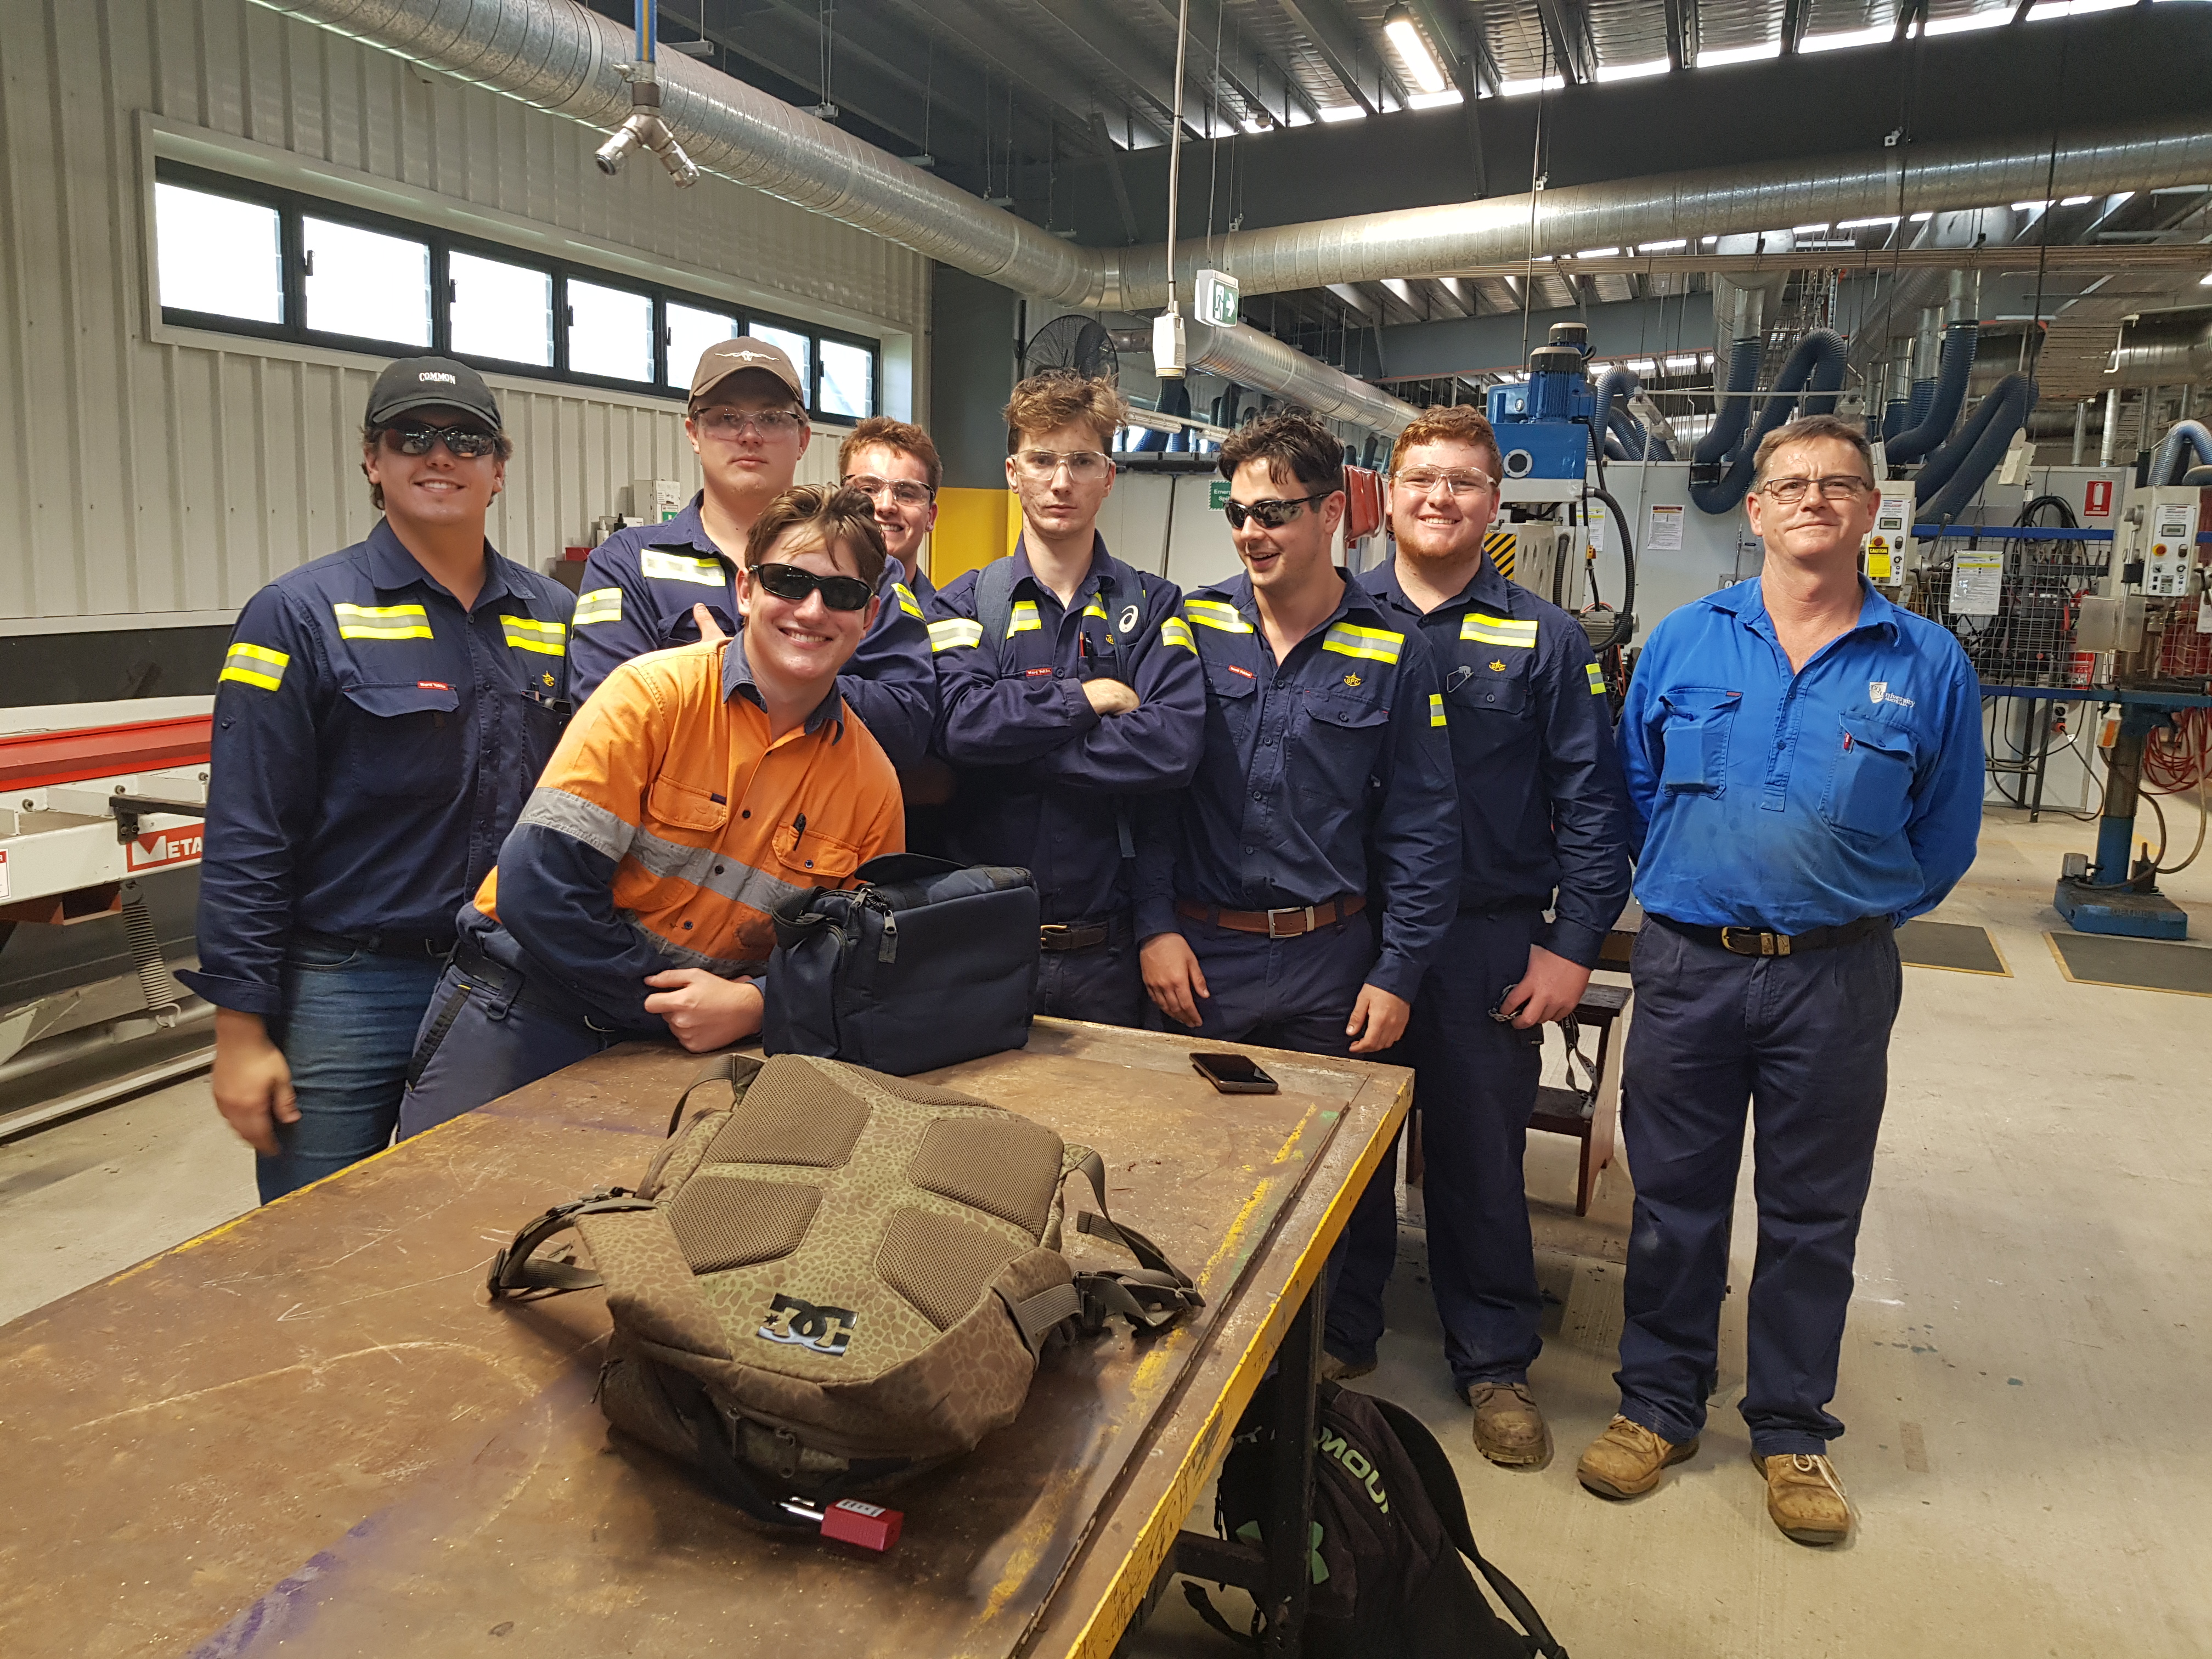 Apprentices attend the Get Ready for Work program at the Gladstone Marina campus.